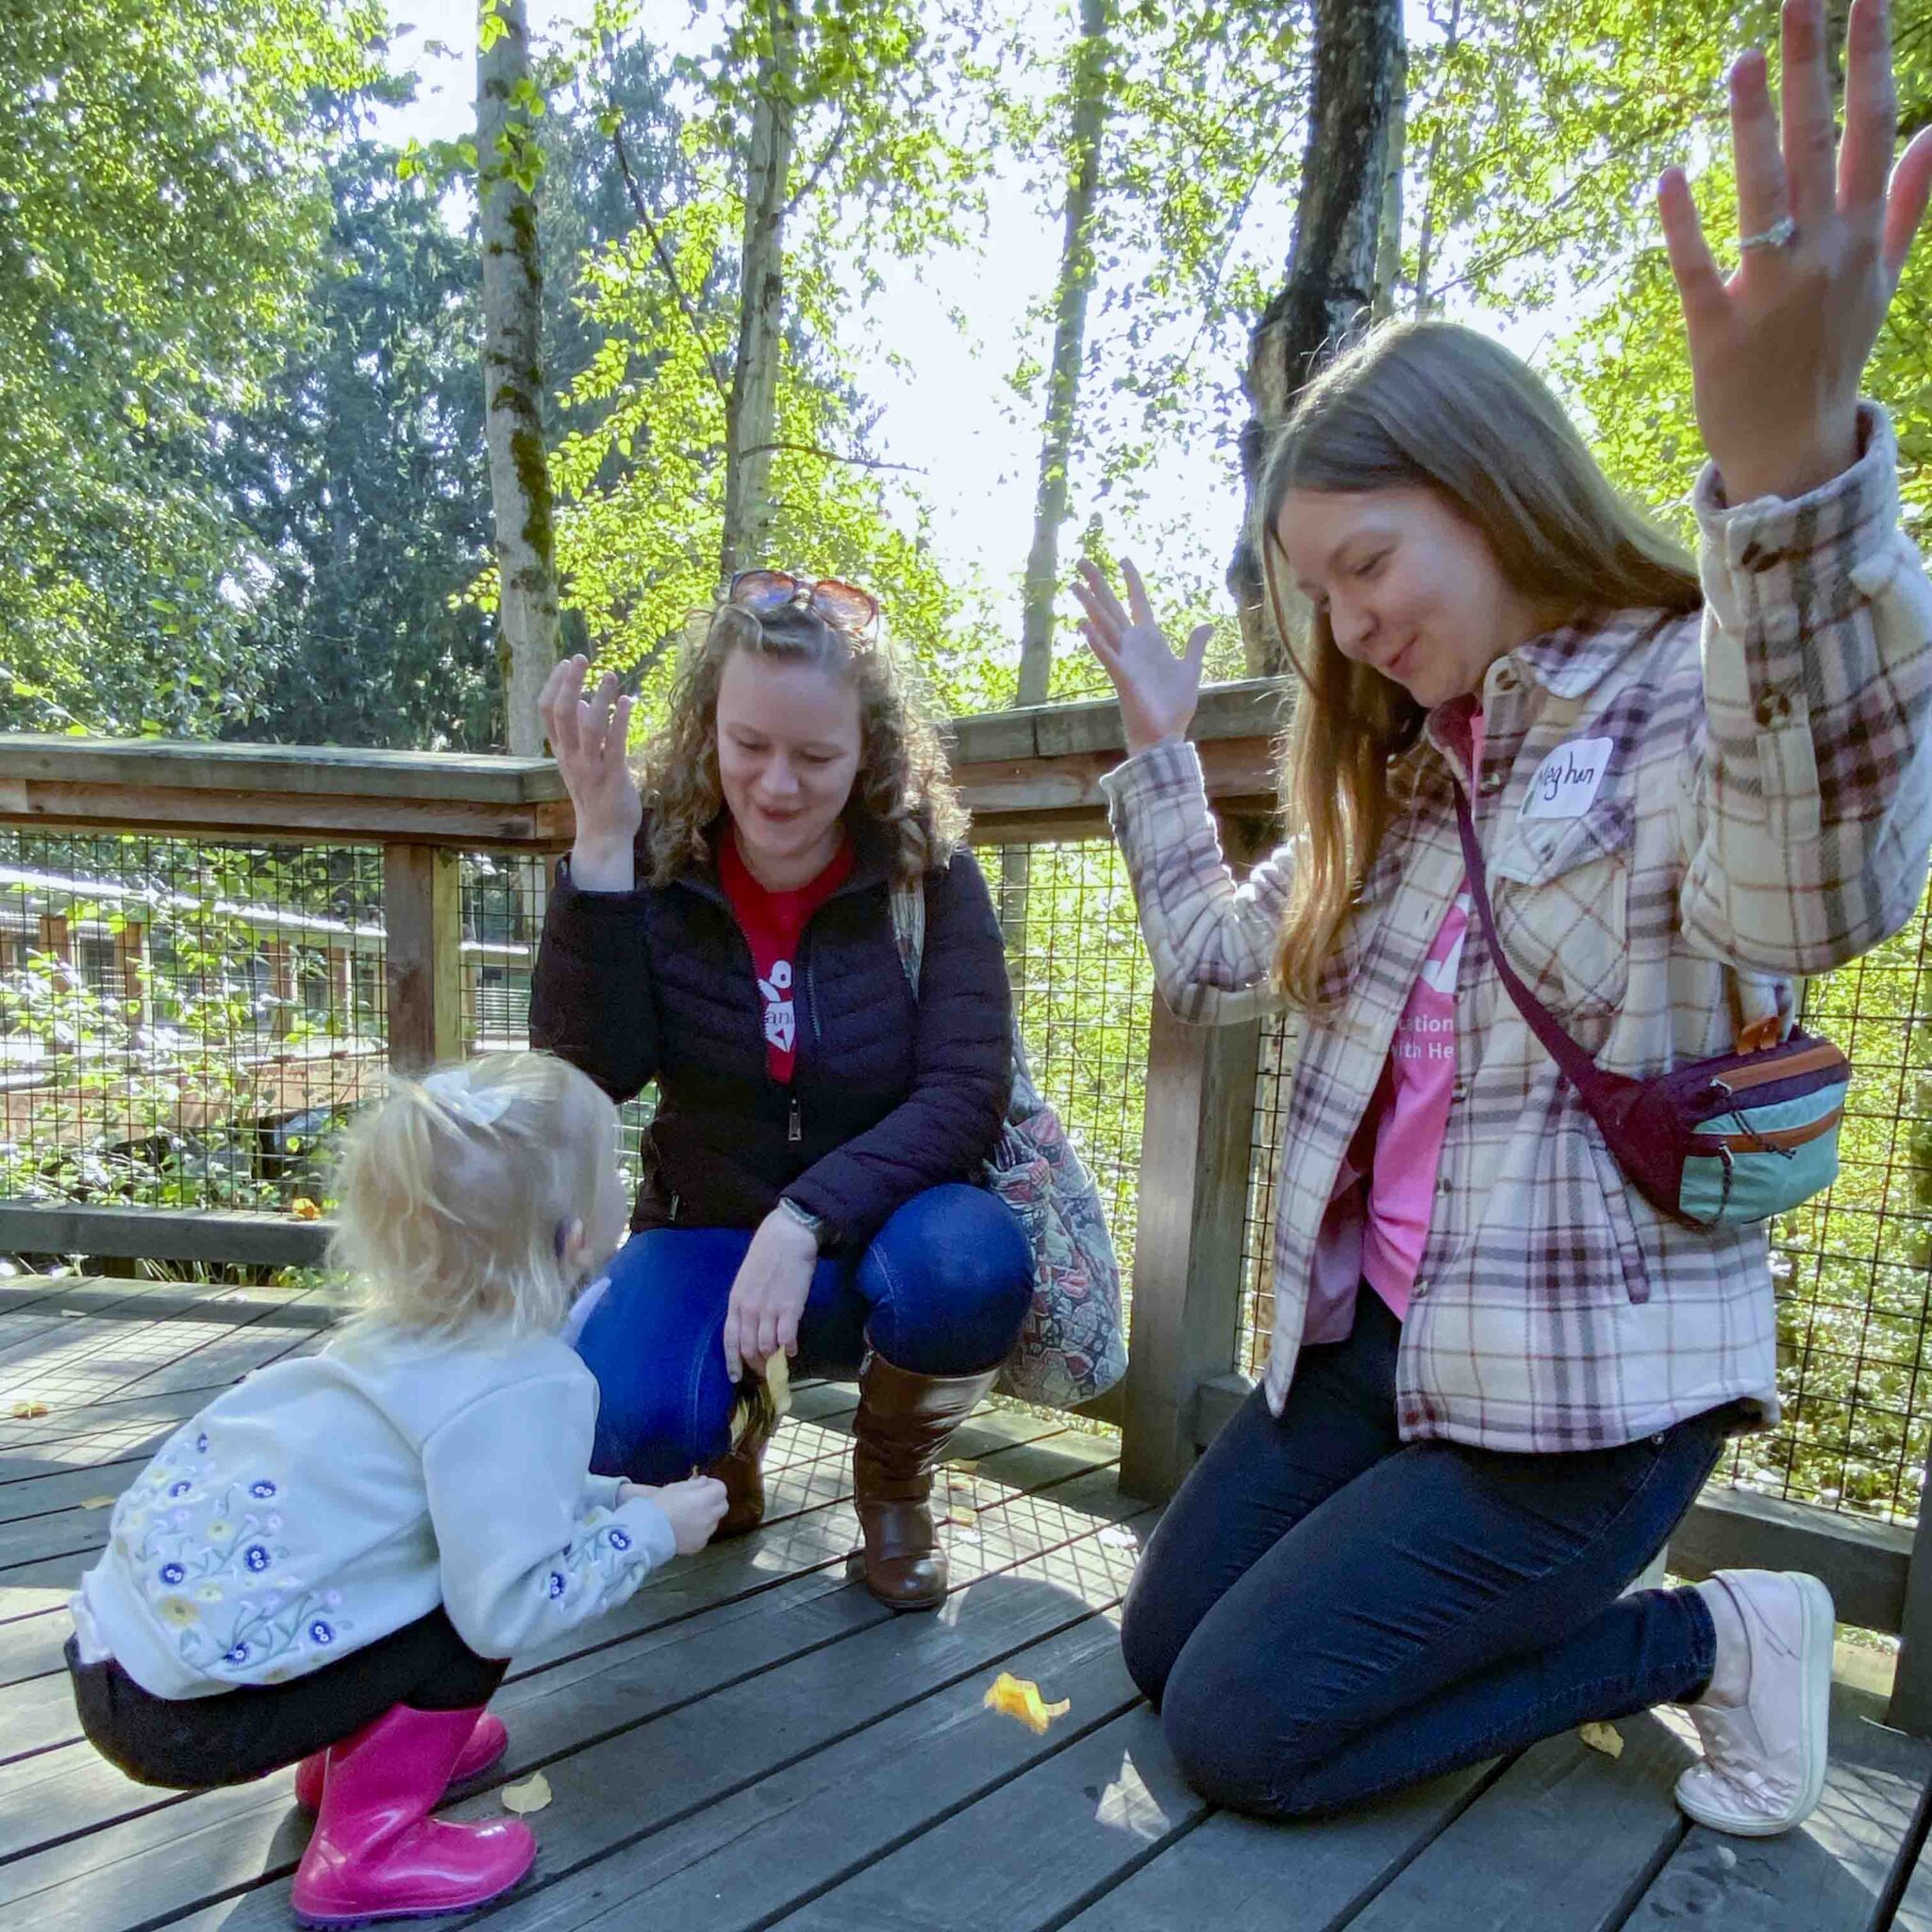 Two adults interact with a deaf child playing on a wooden boardwalk